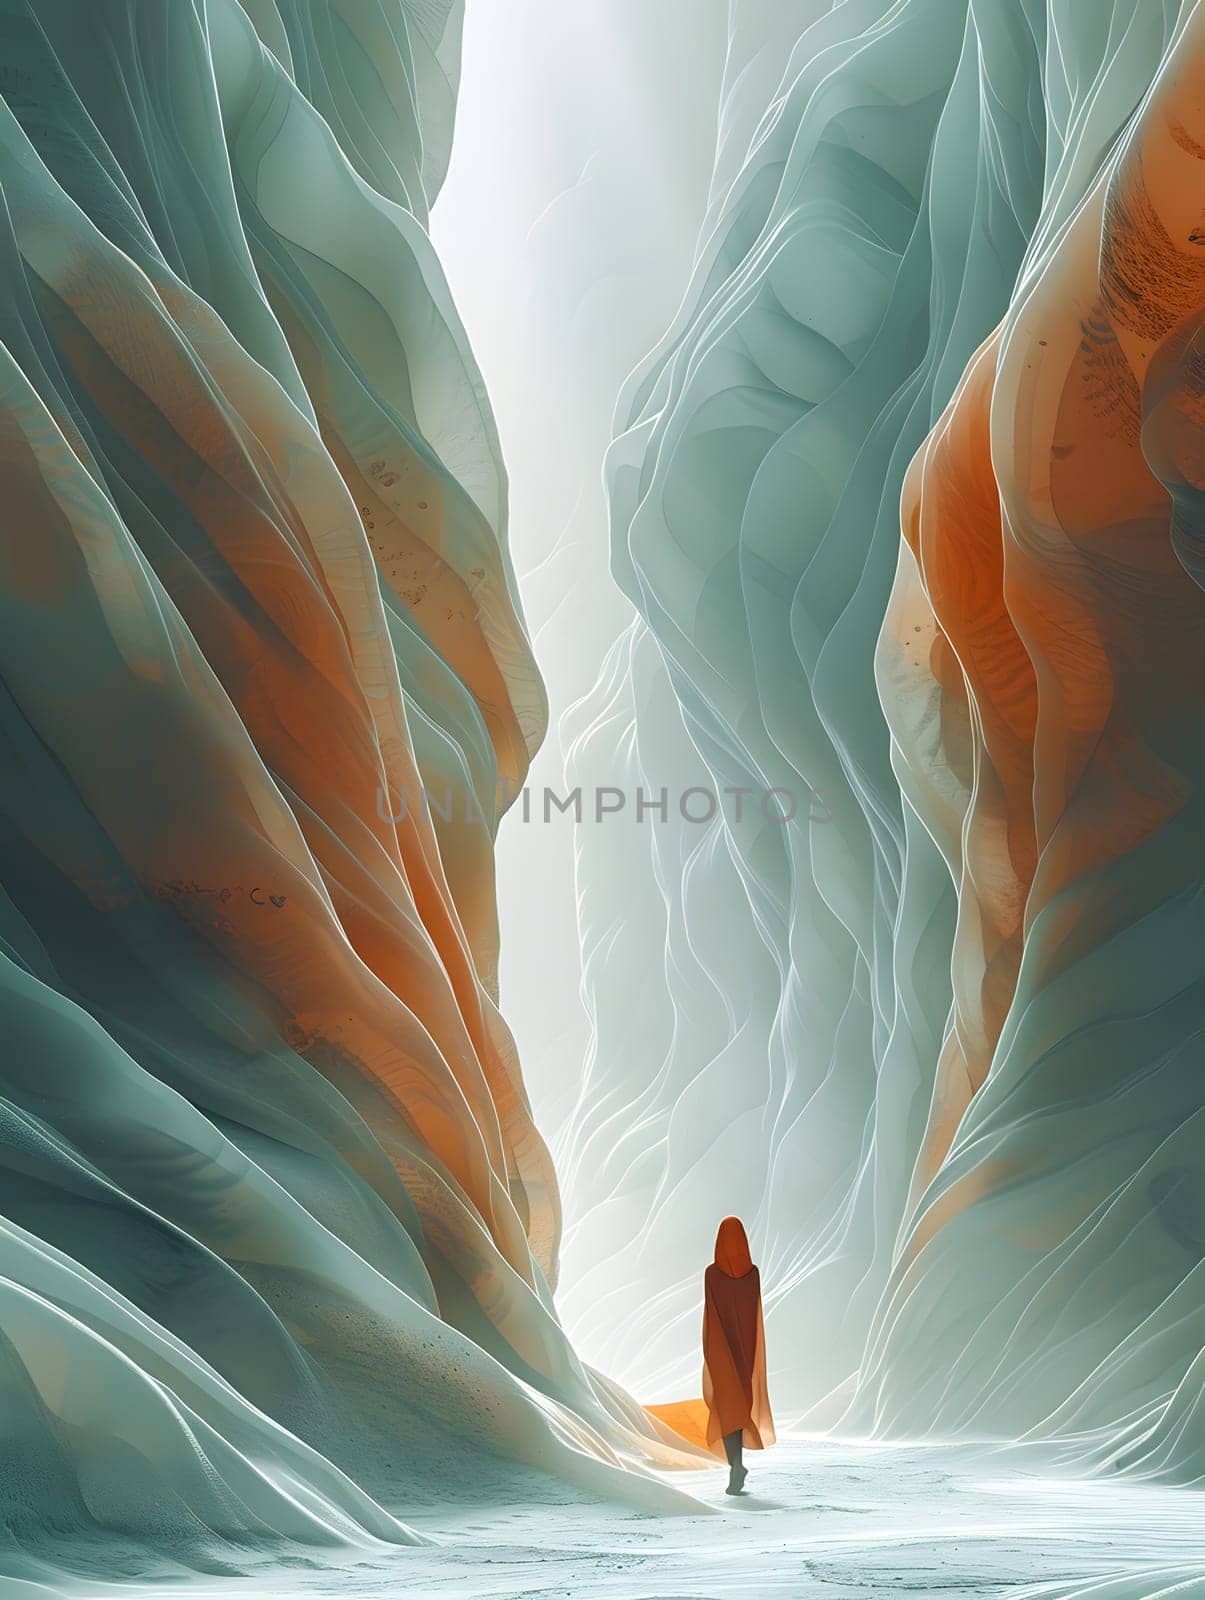 An artist paints a stunning landscape of a canyon using watercolor paint by Nadtochiy